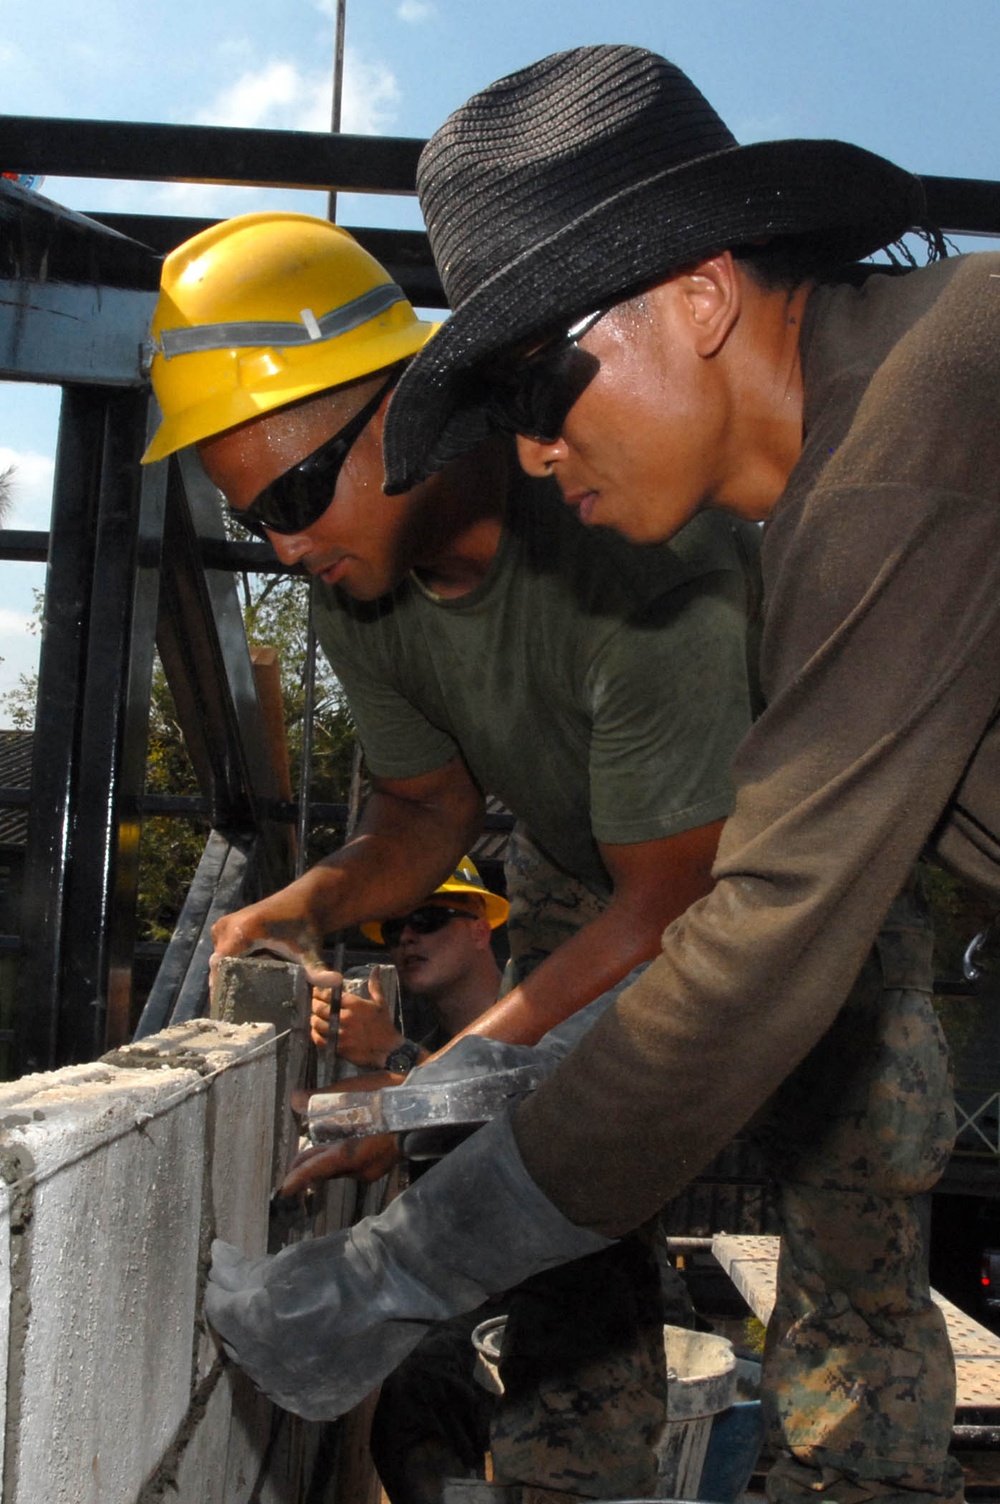 Engineers build buildings, relationships during CG10